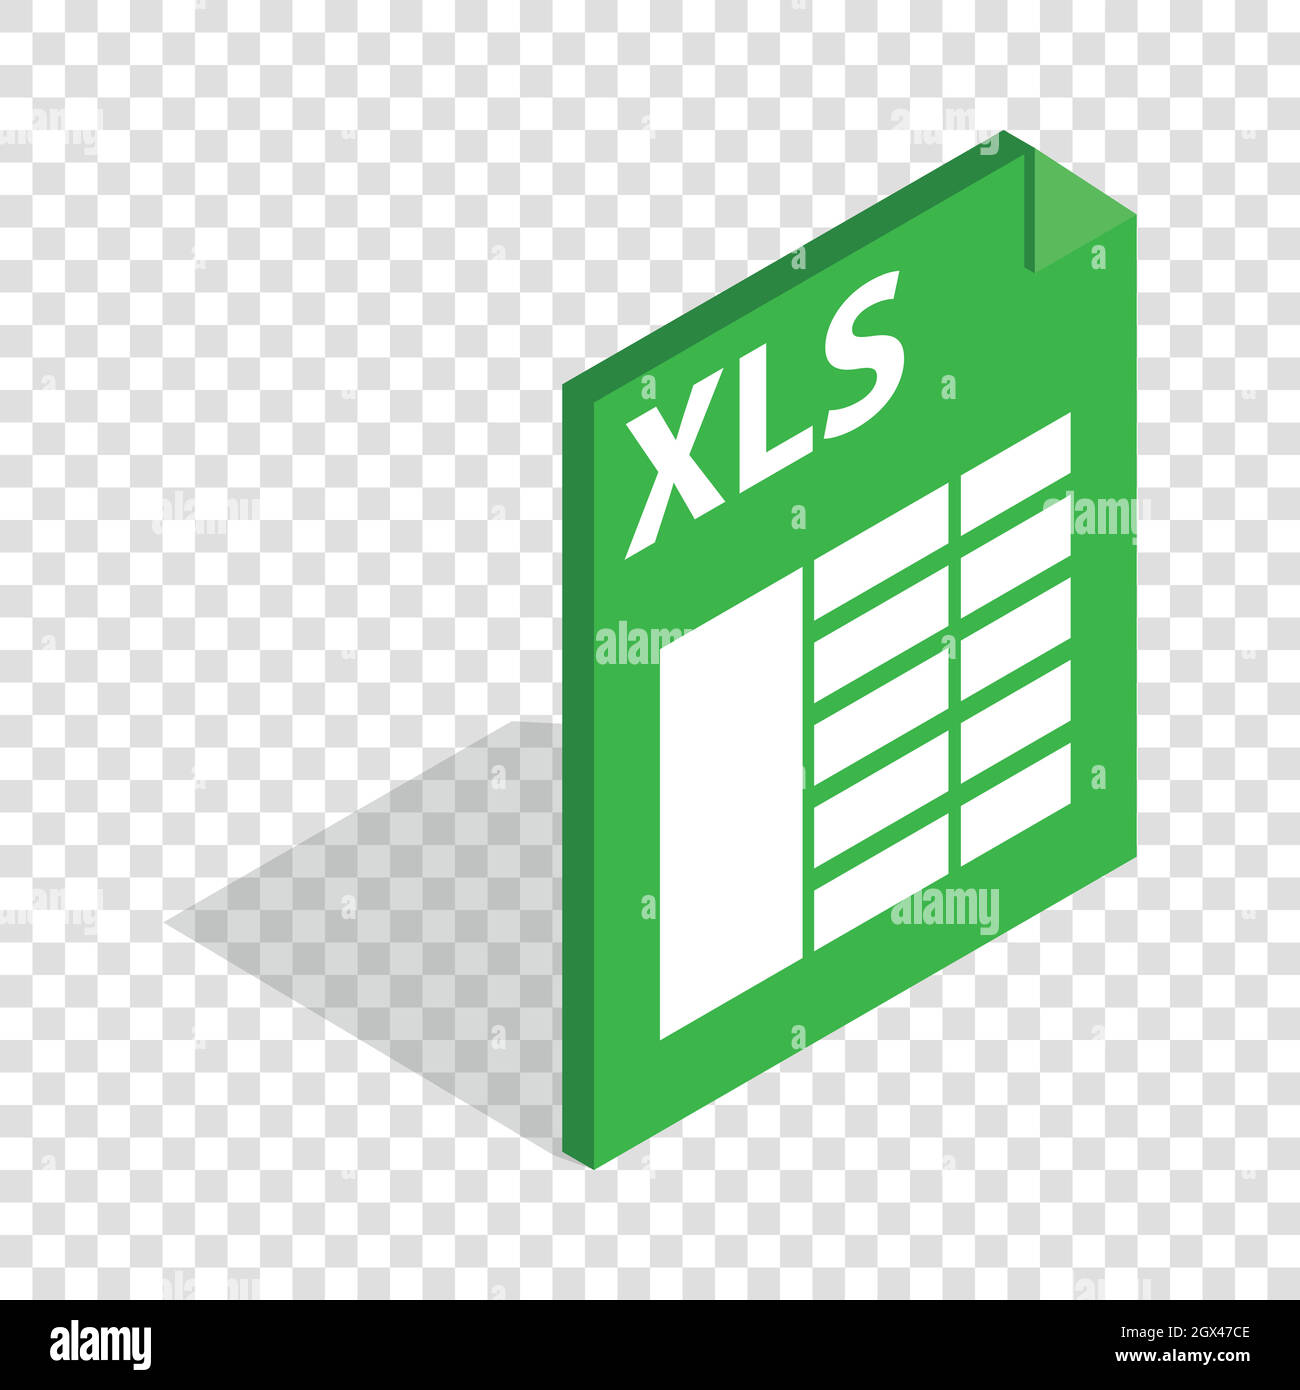 File format xls isometric icon Stock Vector